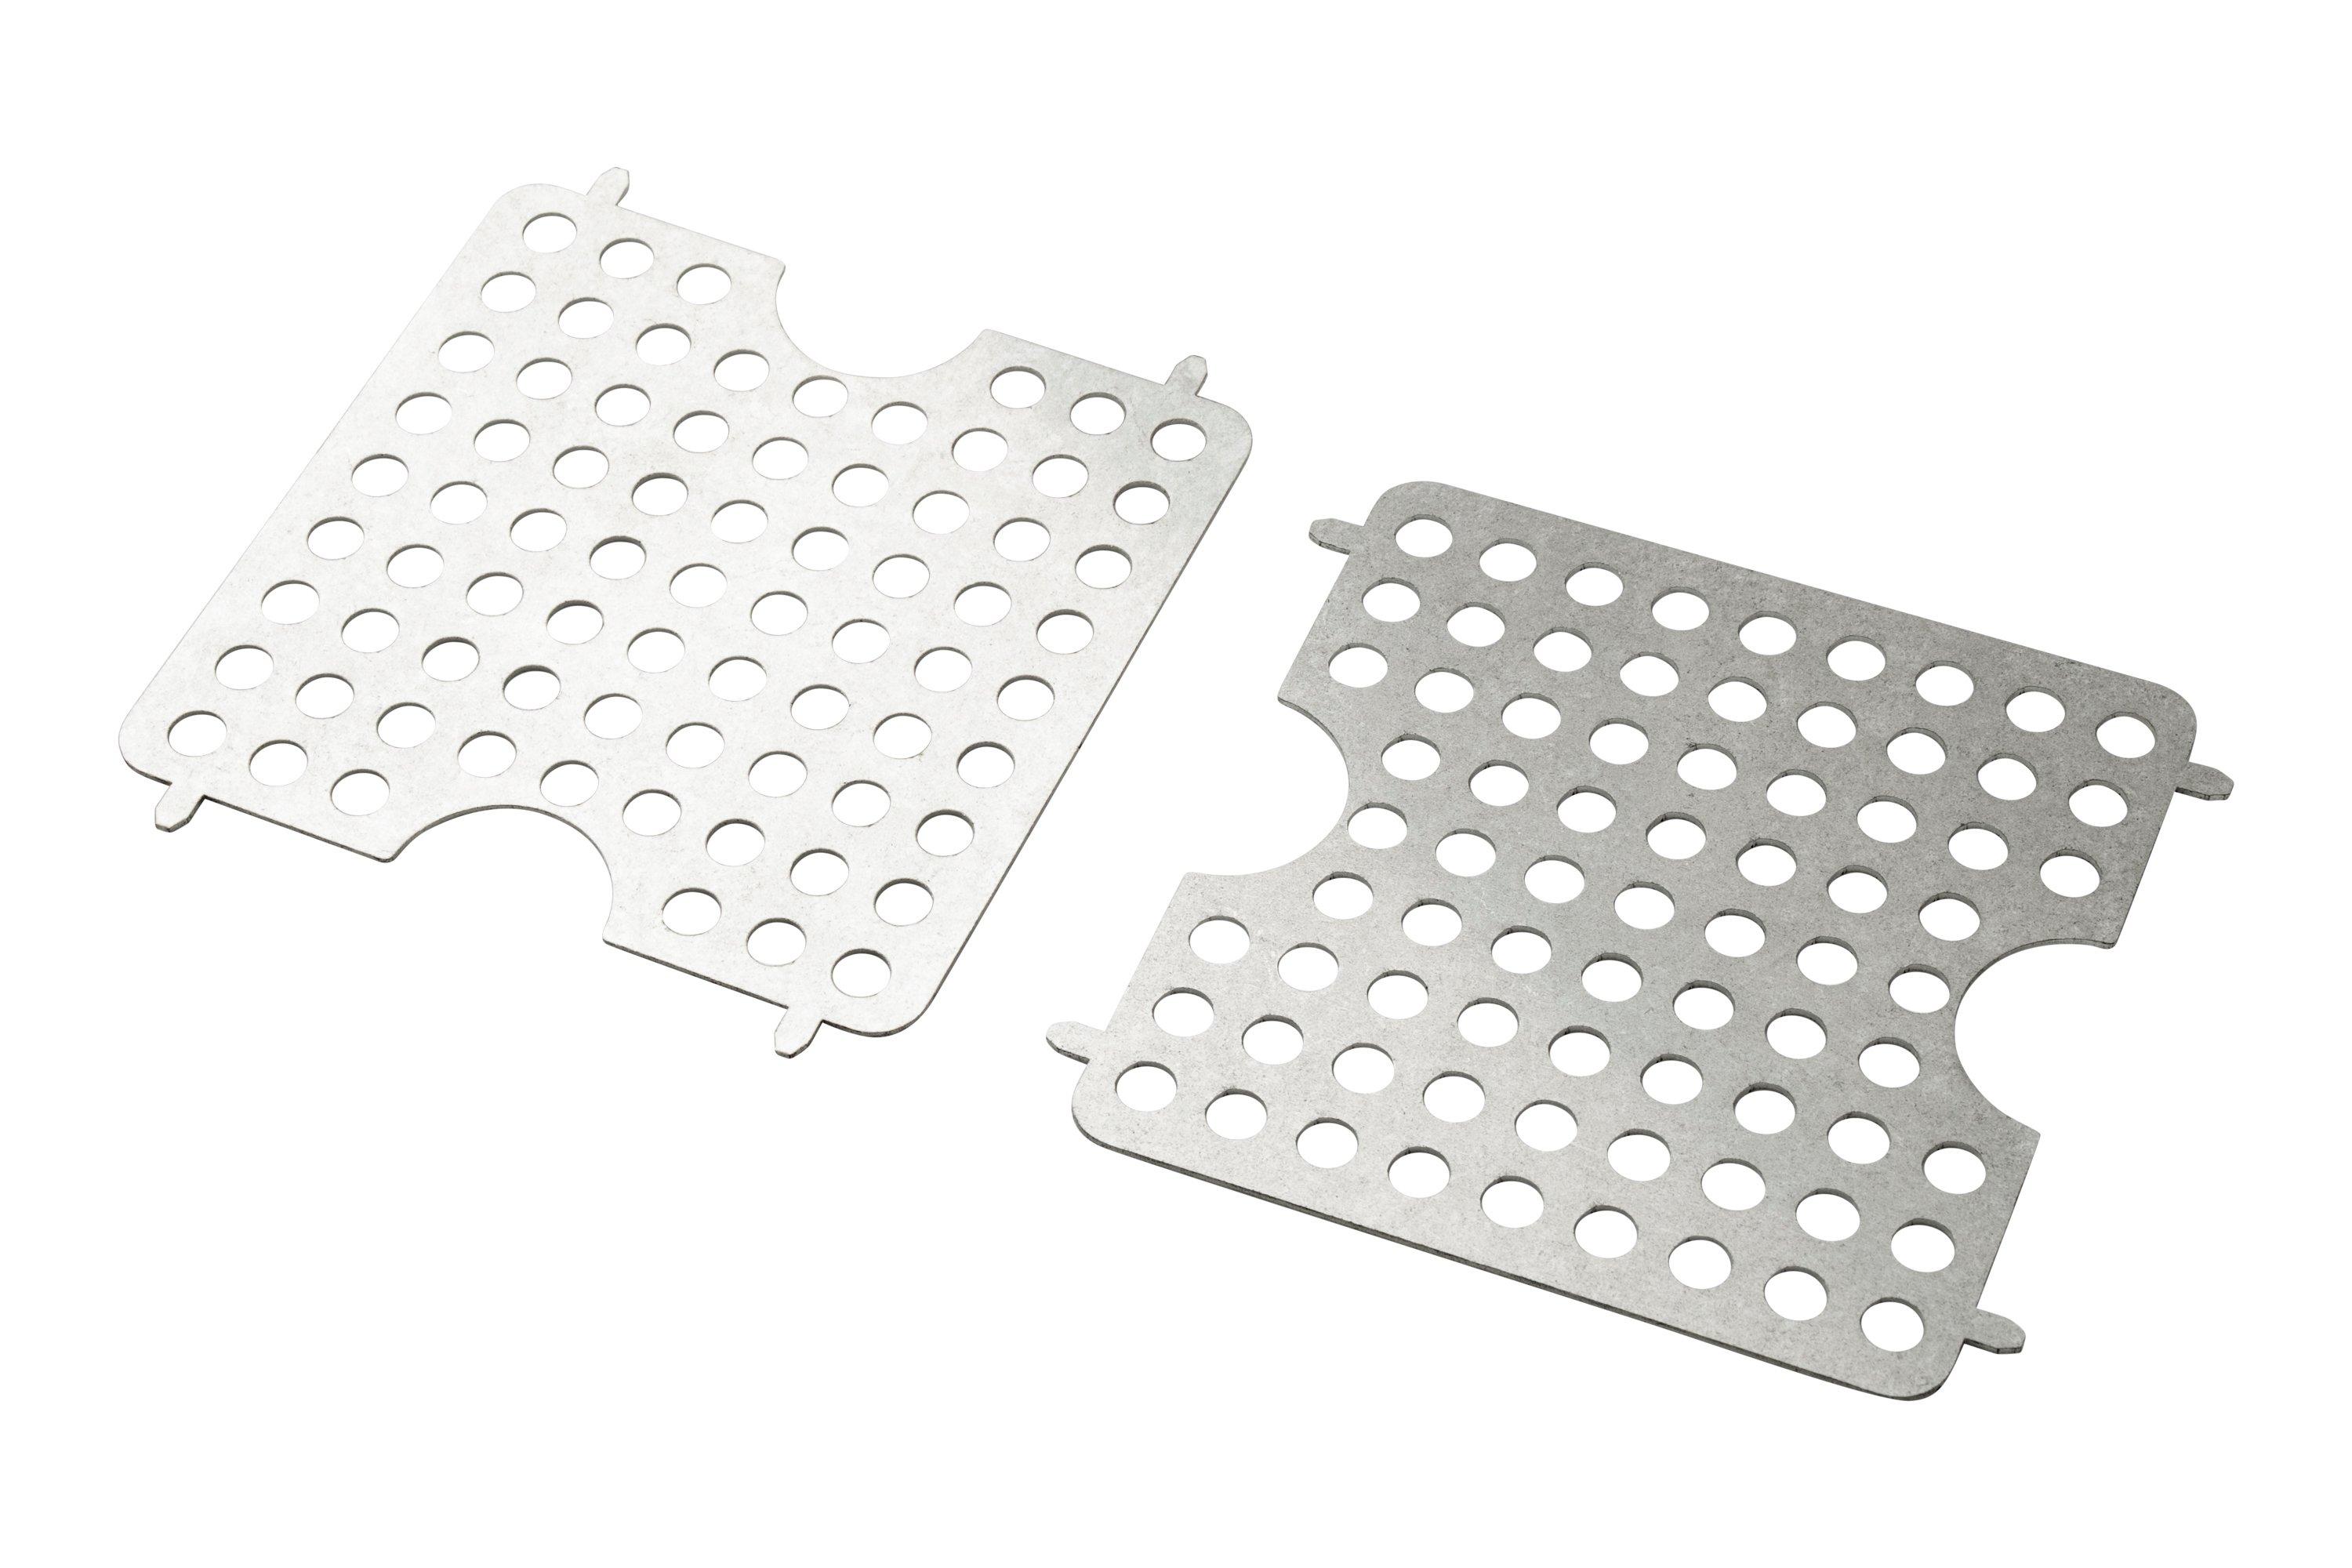 Essentials Universal Grate Bushbox LF, grill plate the Bushbox LF | Advantageously shopping at